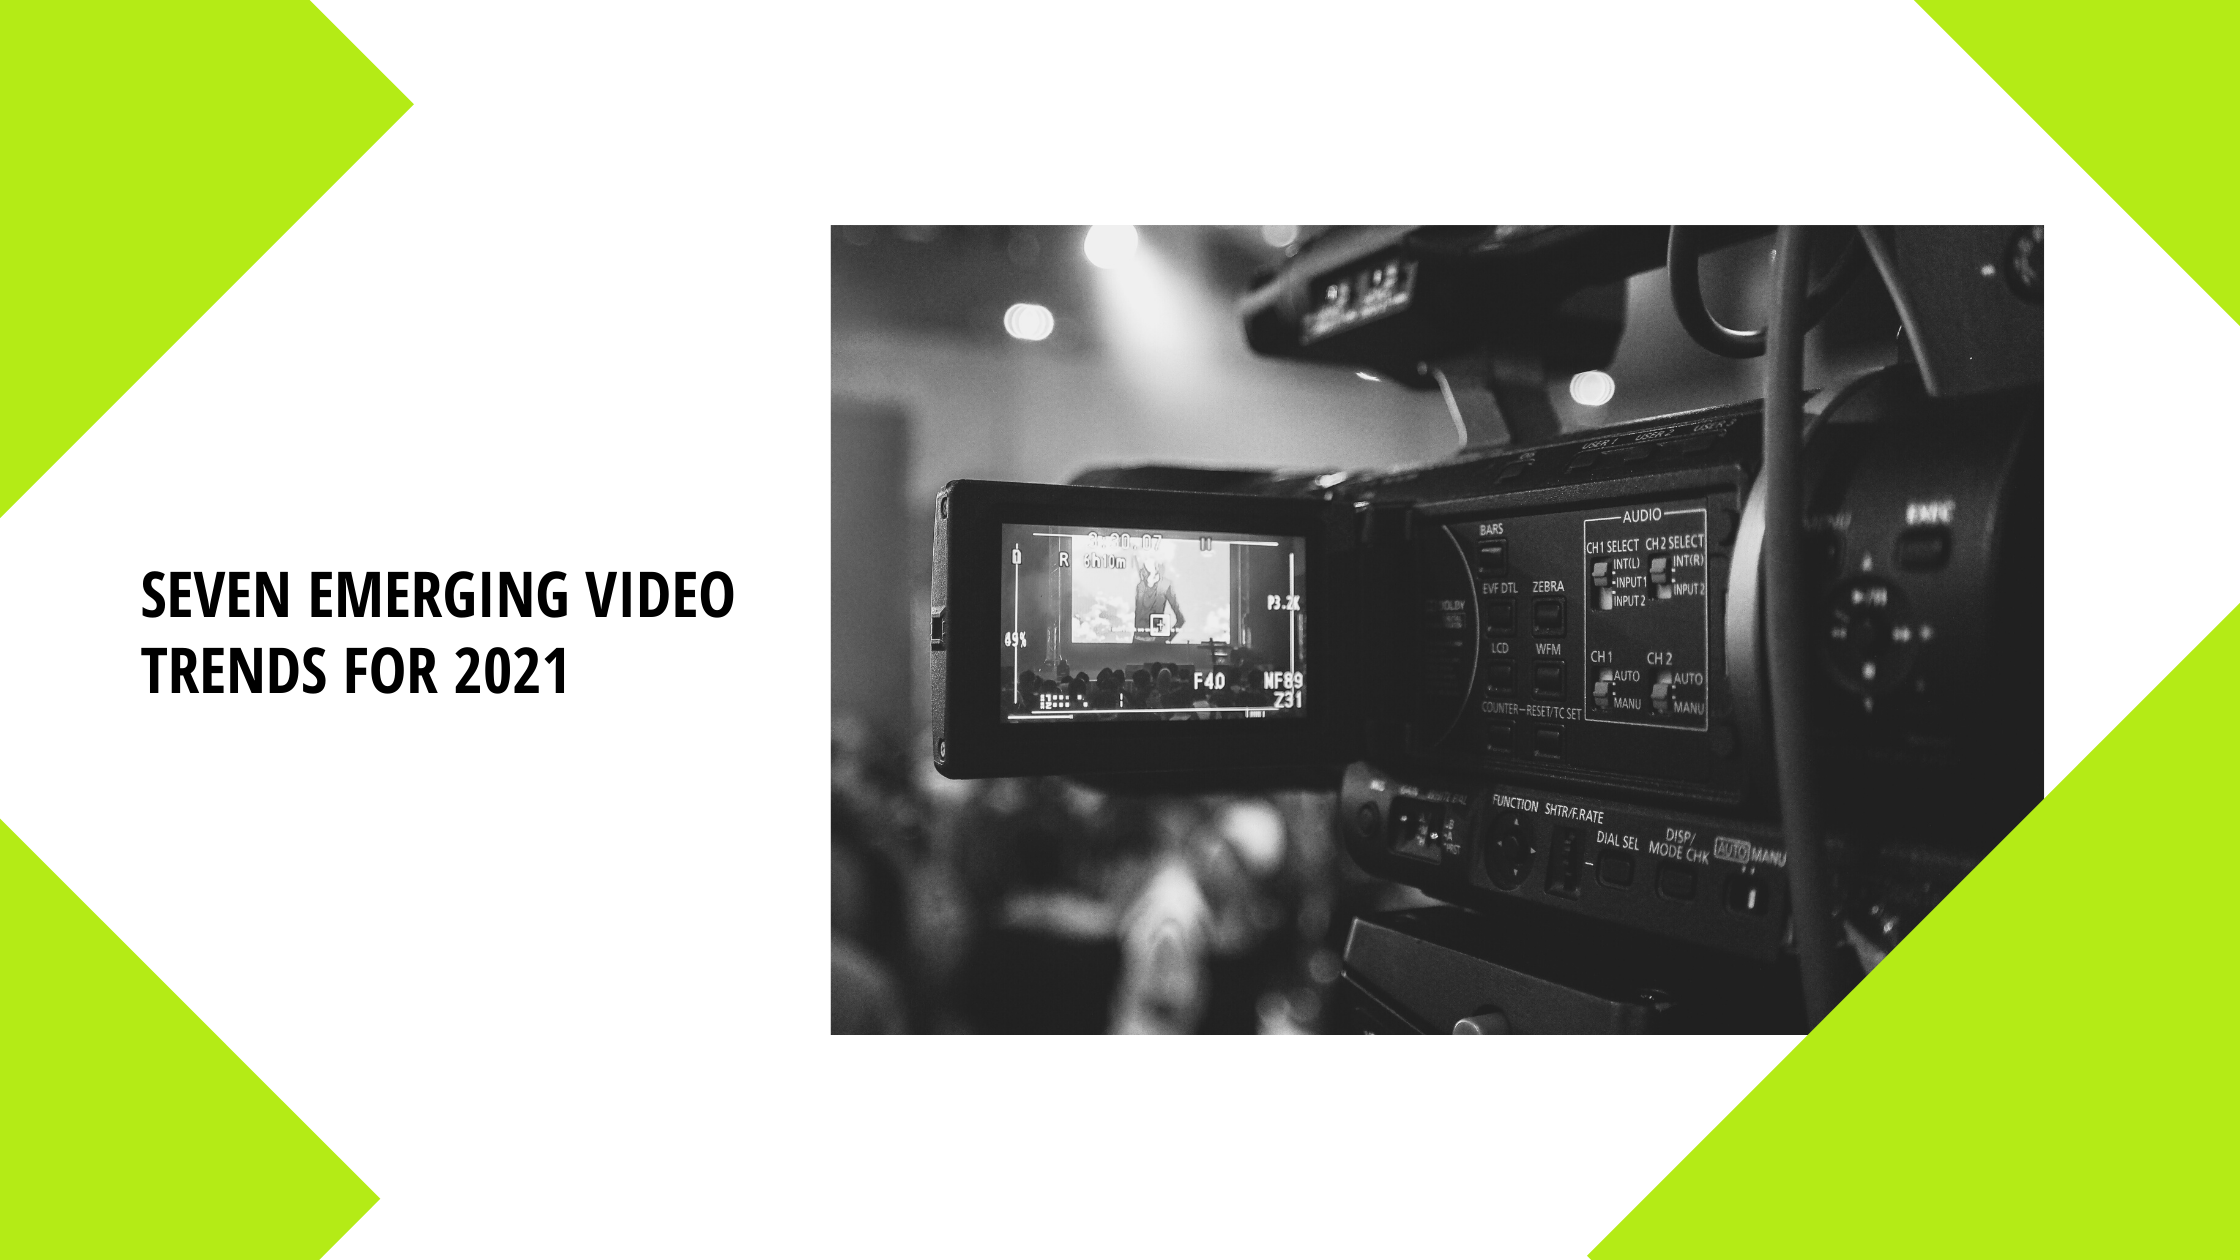 Seven emerging video trends for 2021